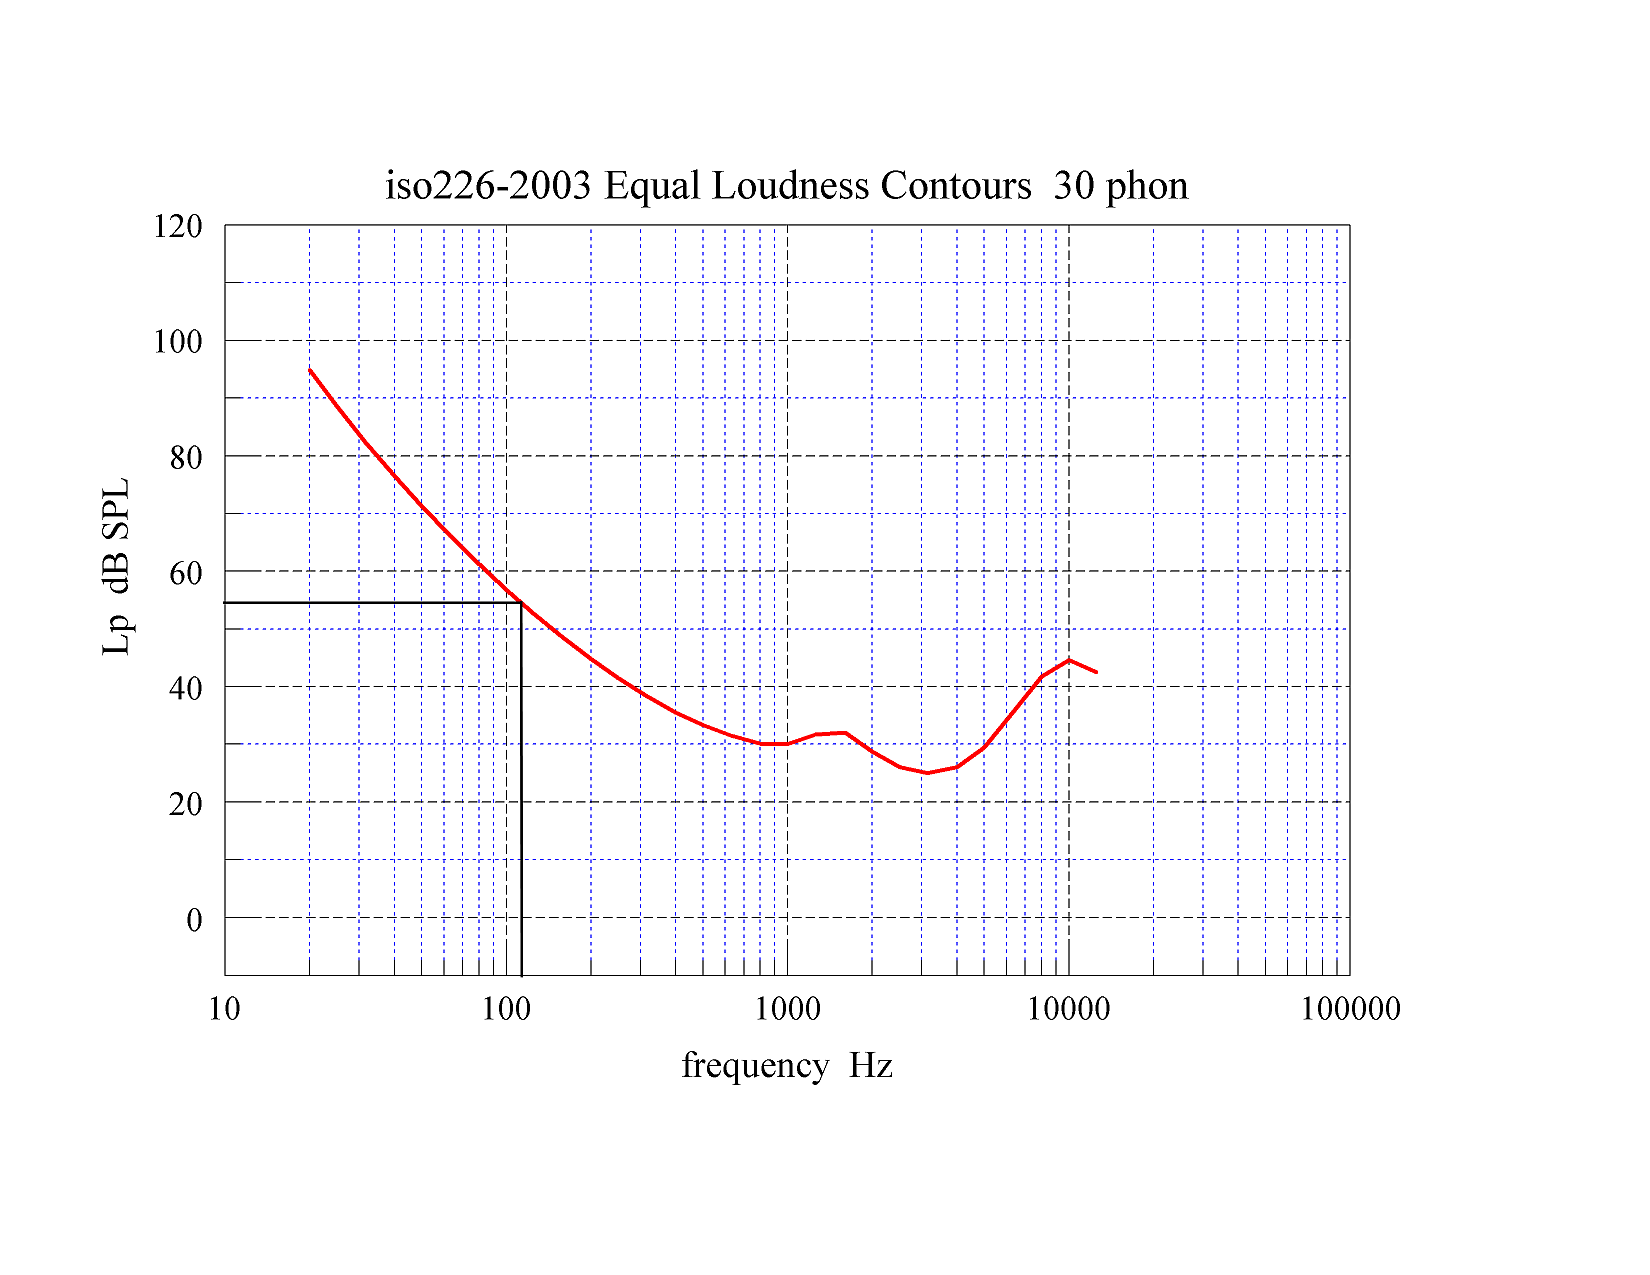 iso226-2003 Equal Loudness Contours - 30 phon 1 KHz - annotated - small.png